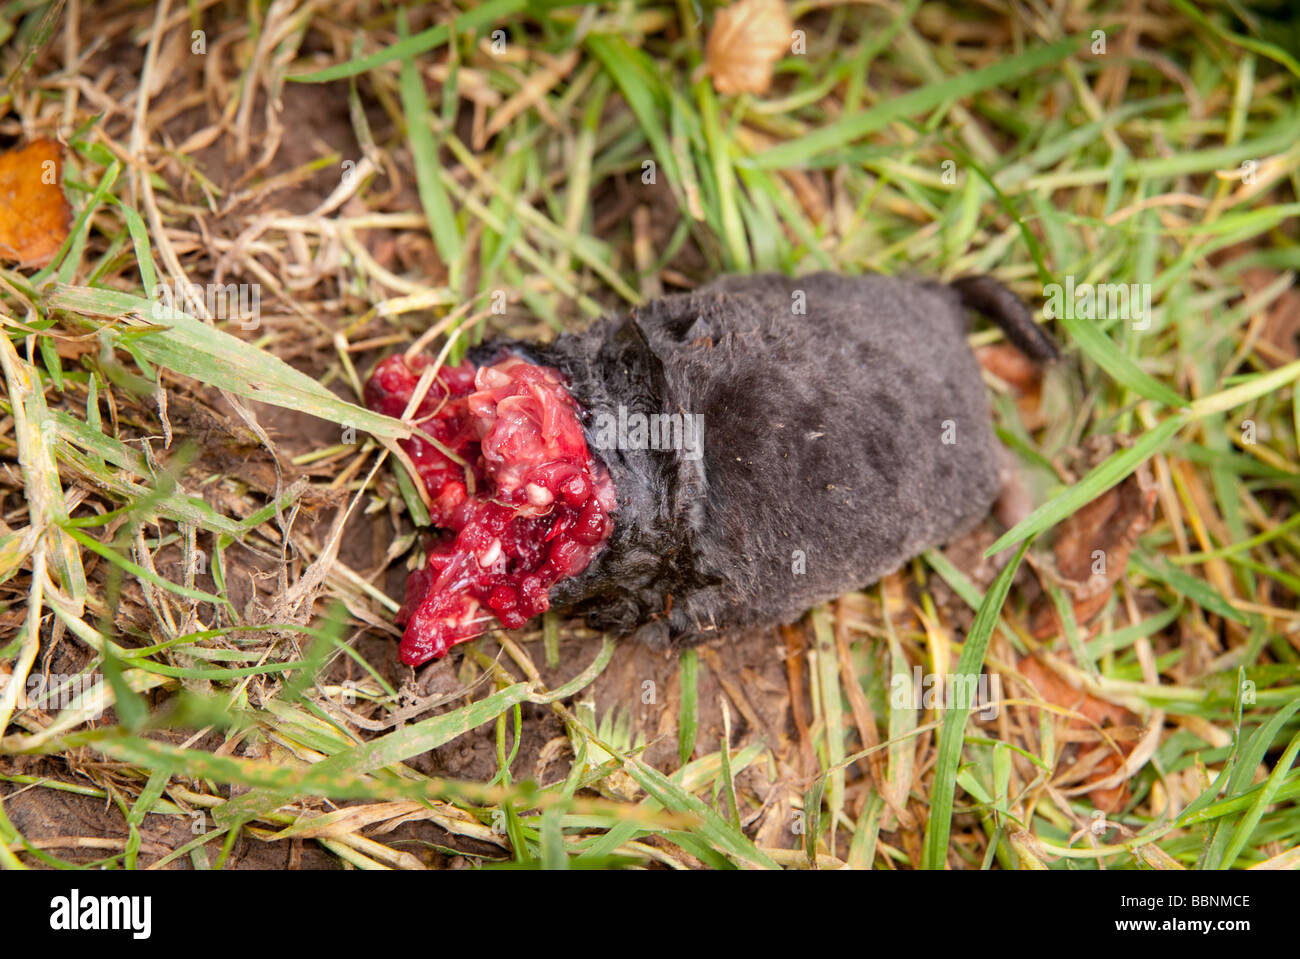 dead rodent on grass Stock Photo